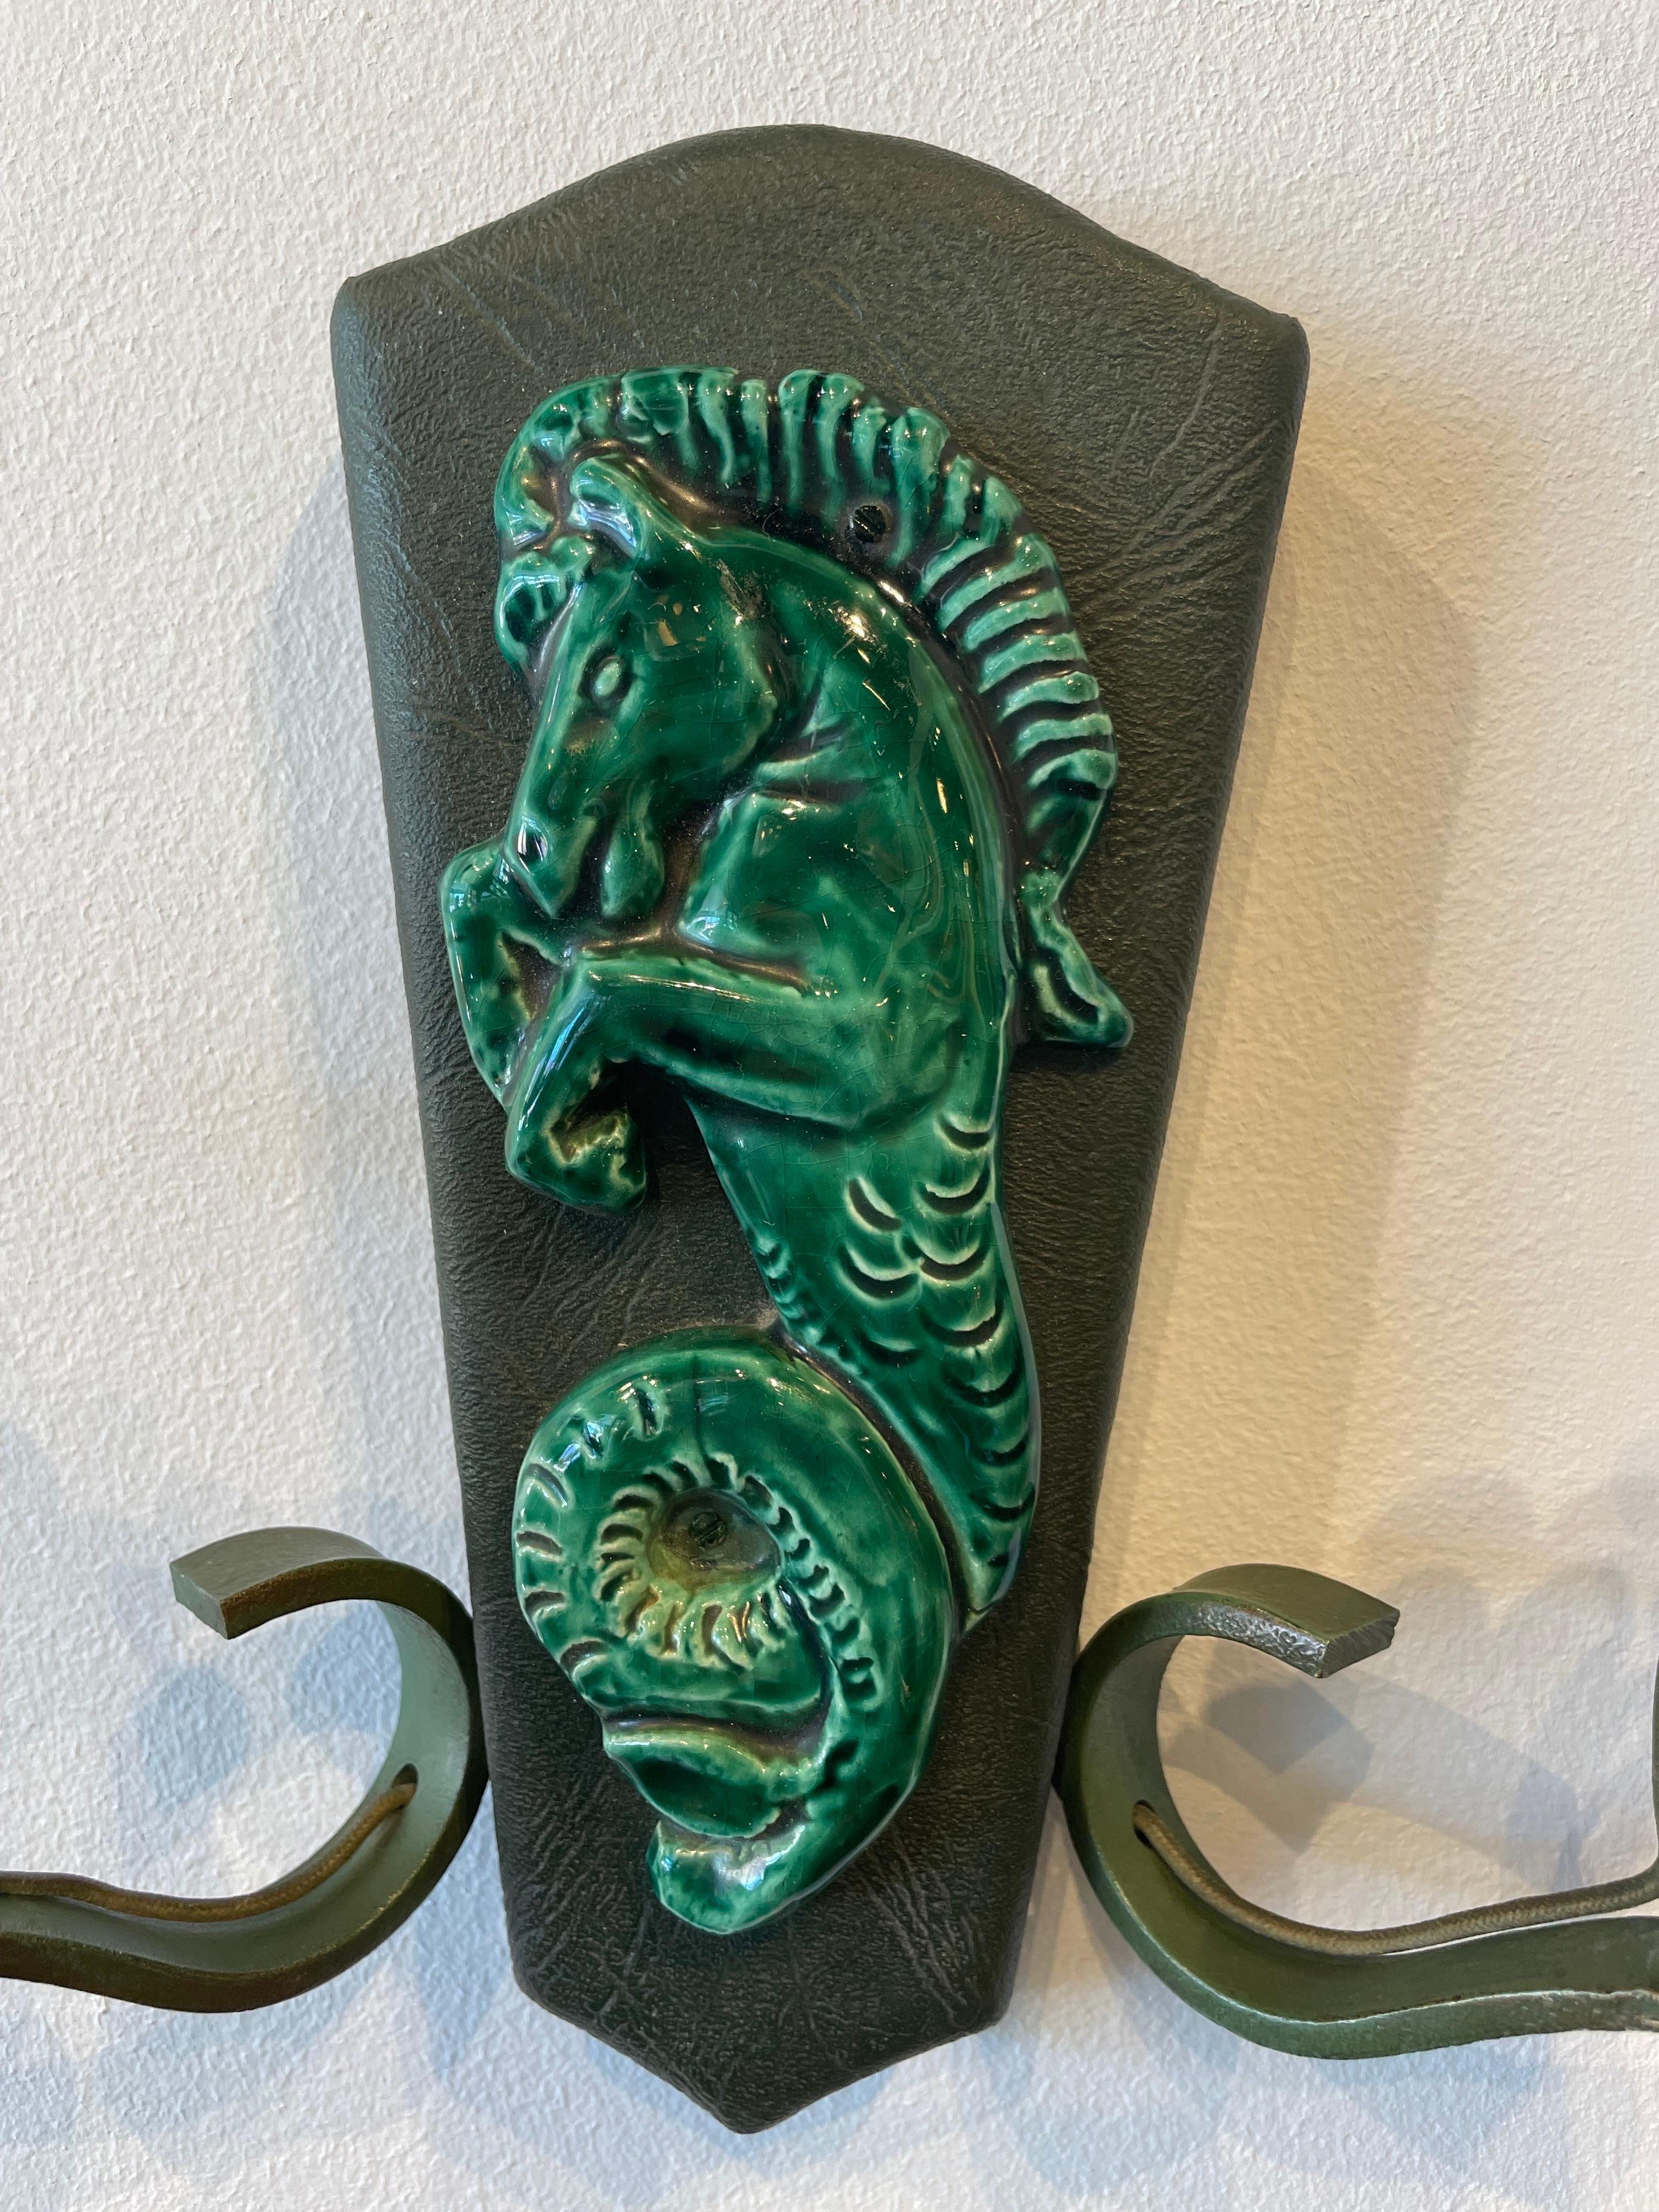 A rare set of 3 Deco wall sconces with double arm lights and themes of mermaid and seahorses. Metal work, leatherette and ceramic is very much in the style of Georges Jouve. Nice green emerald glaze, all original. May need to be rewired and we can